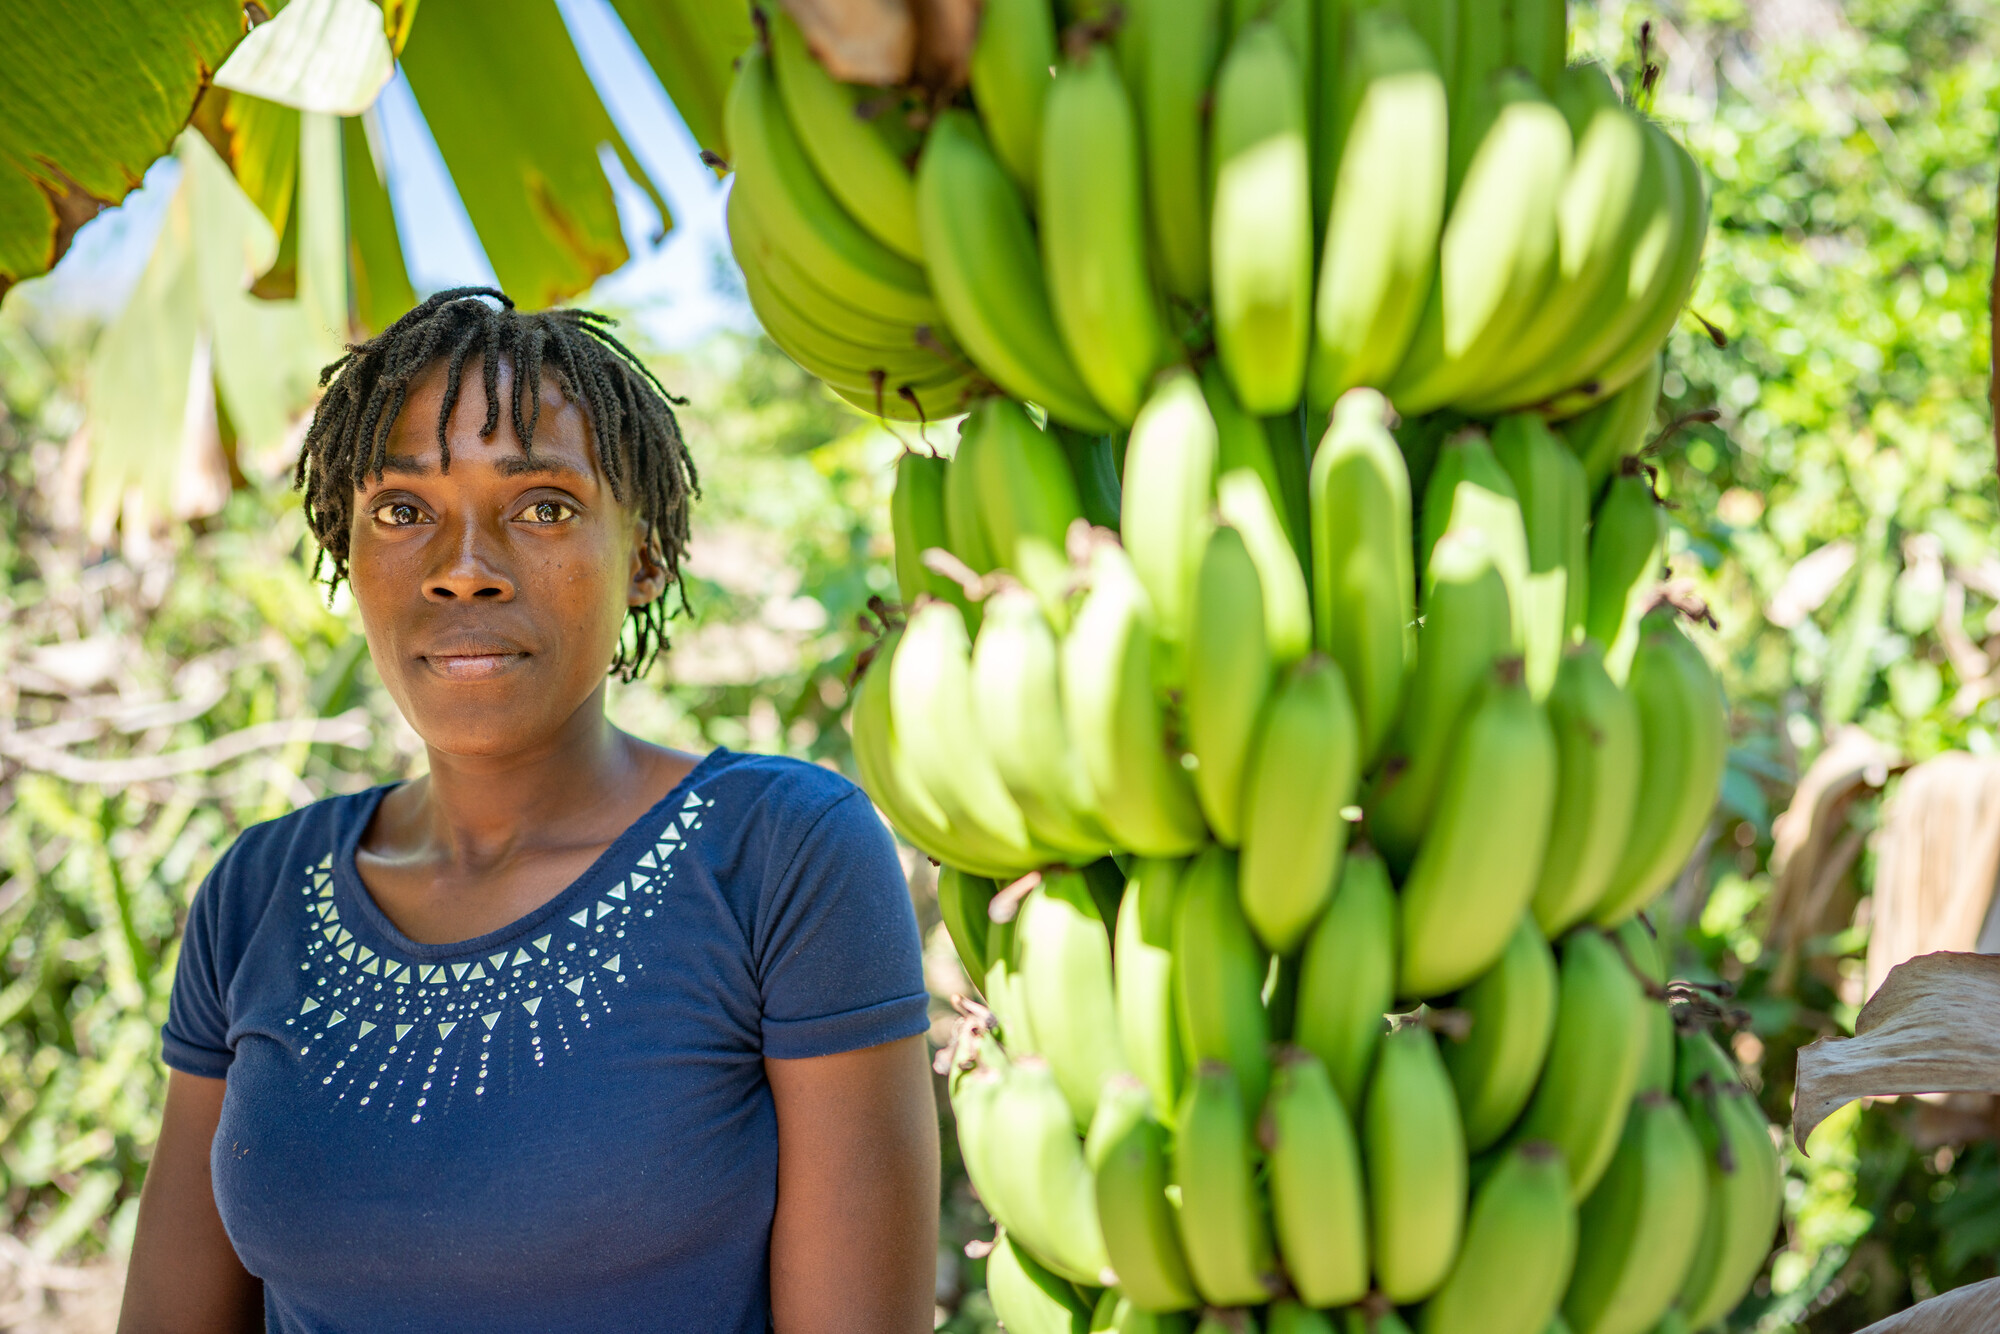 A Haitian woman in a blue shirt stands in her garden. There are bunches of bananas next to her.